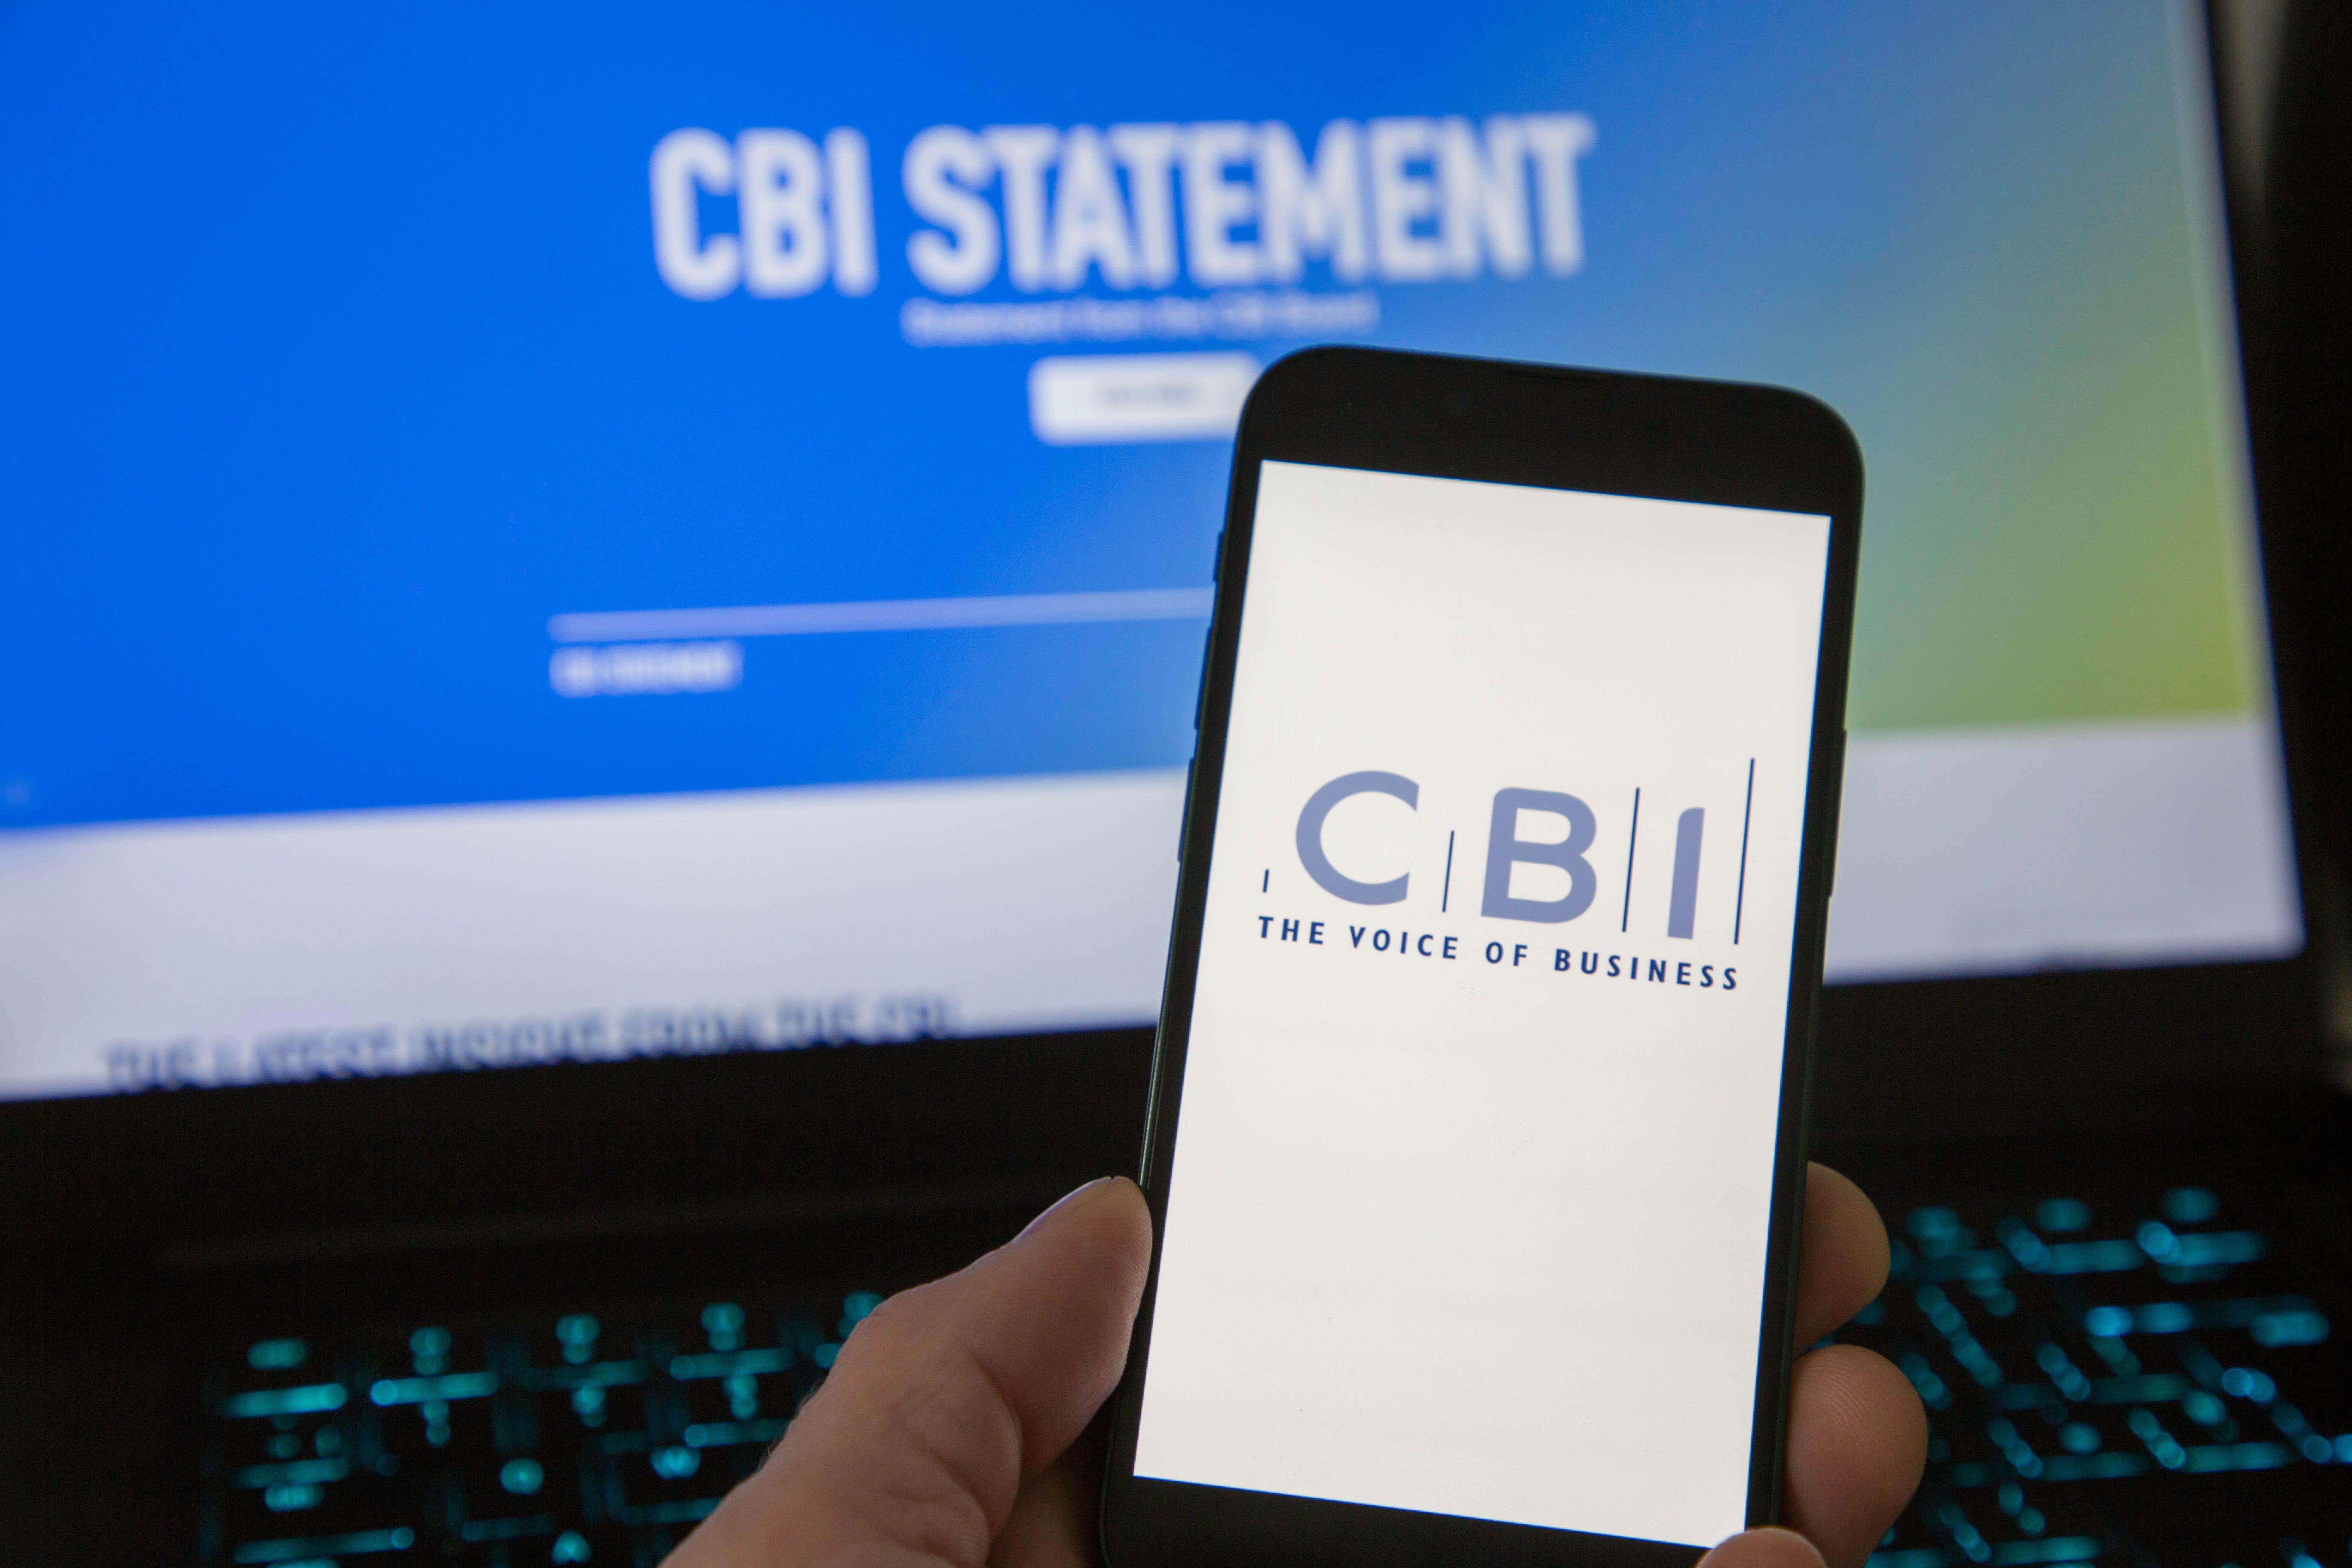 The CBI is set to shrink its workforce in a bid to drastically reduce costs, according to reports (Alamy/PA)